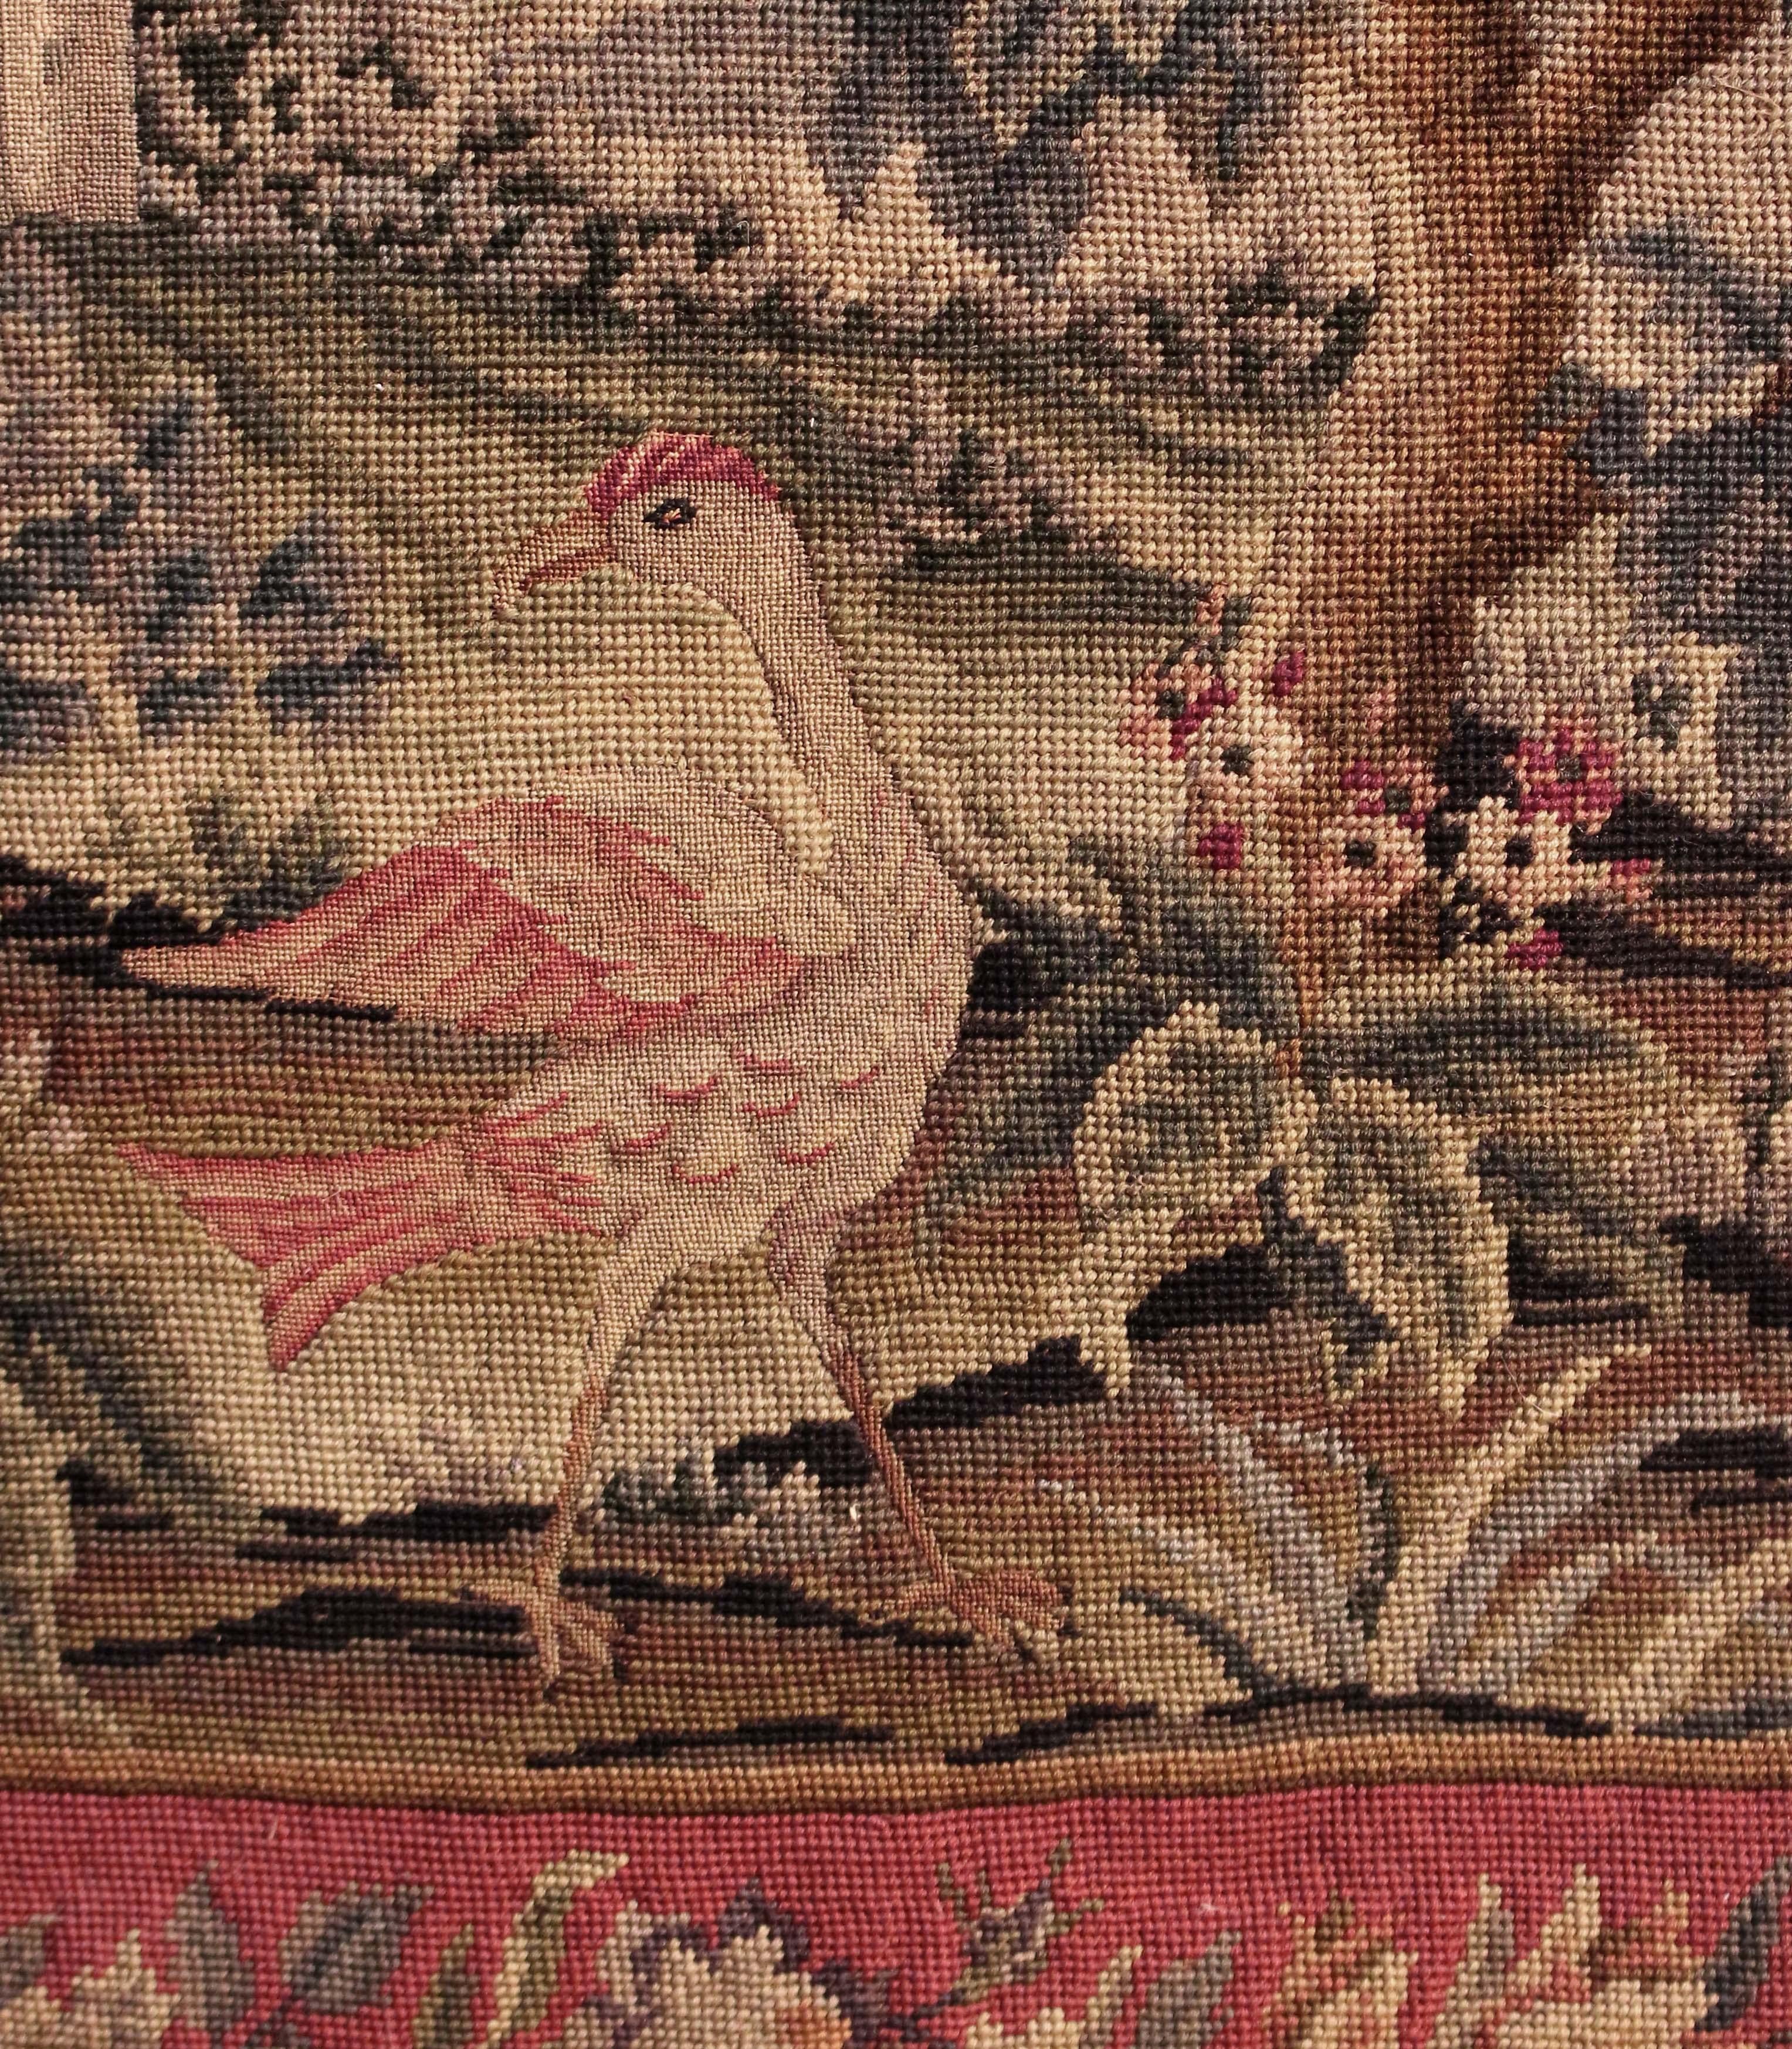 European Mid-19th Century French or German Needlepoint & Petit Point Tapestry For Sale